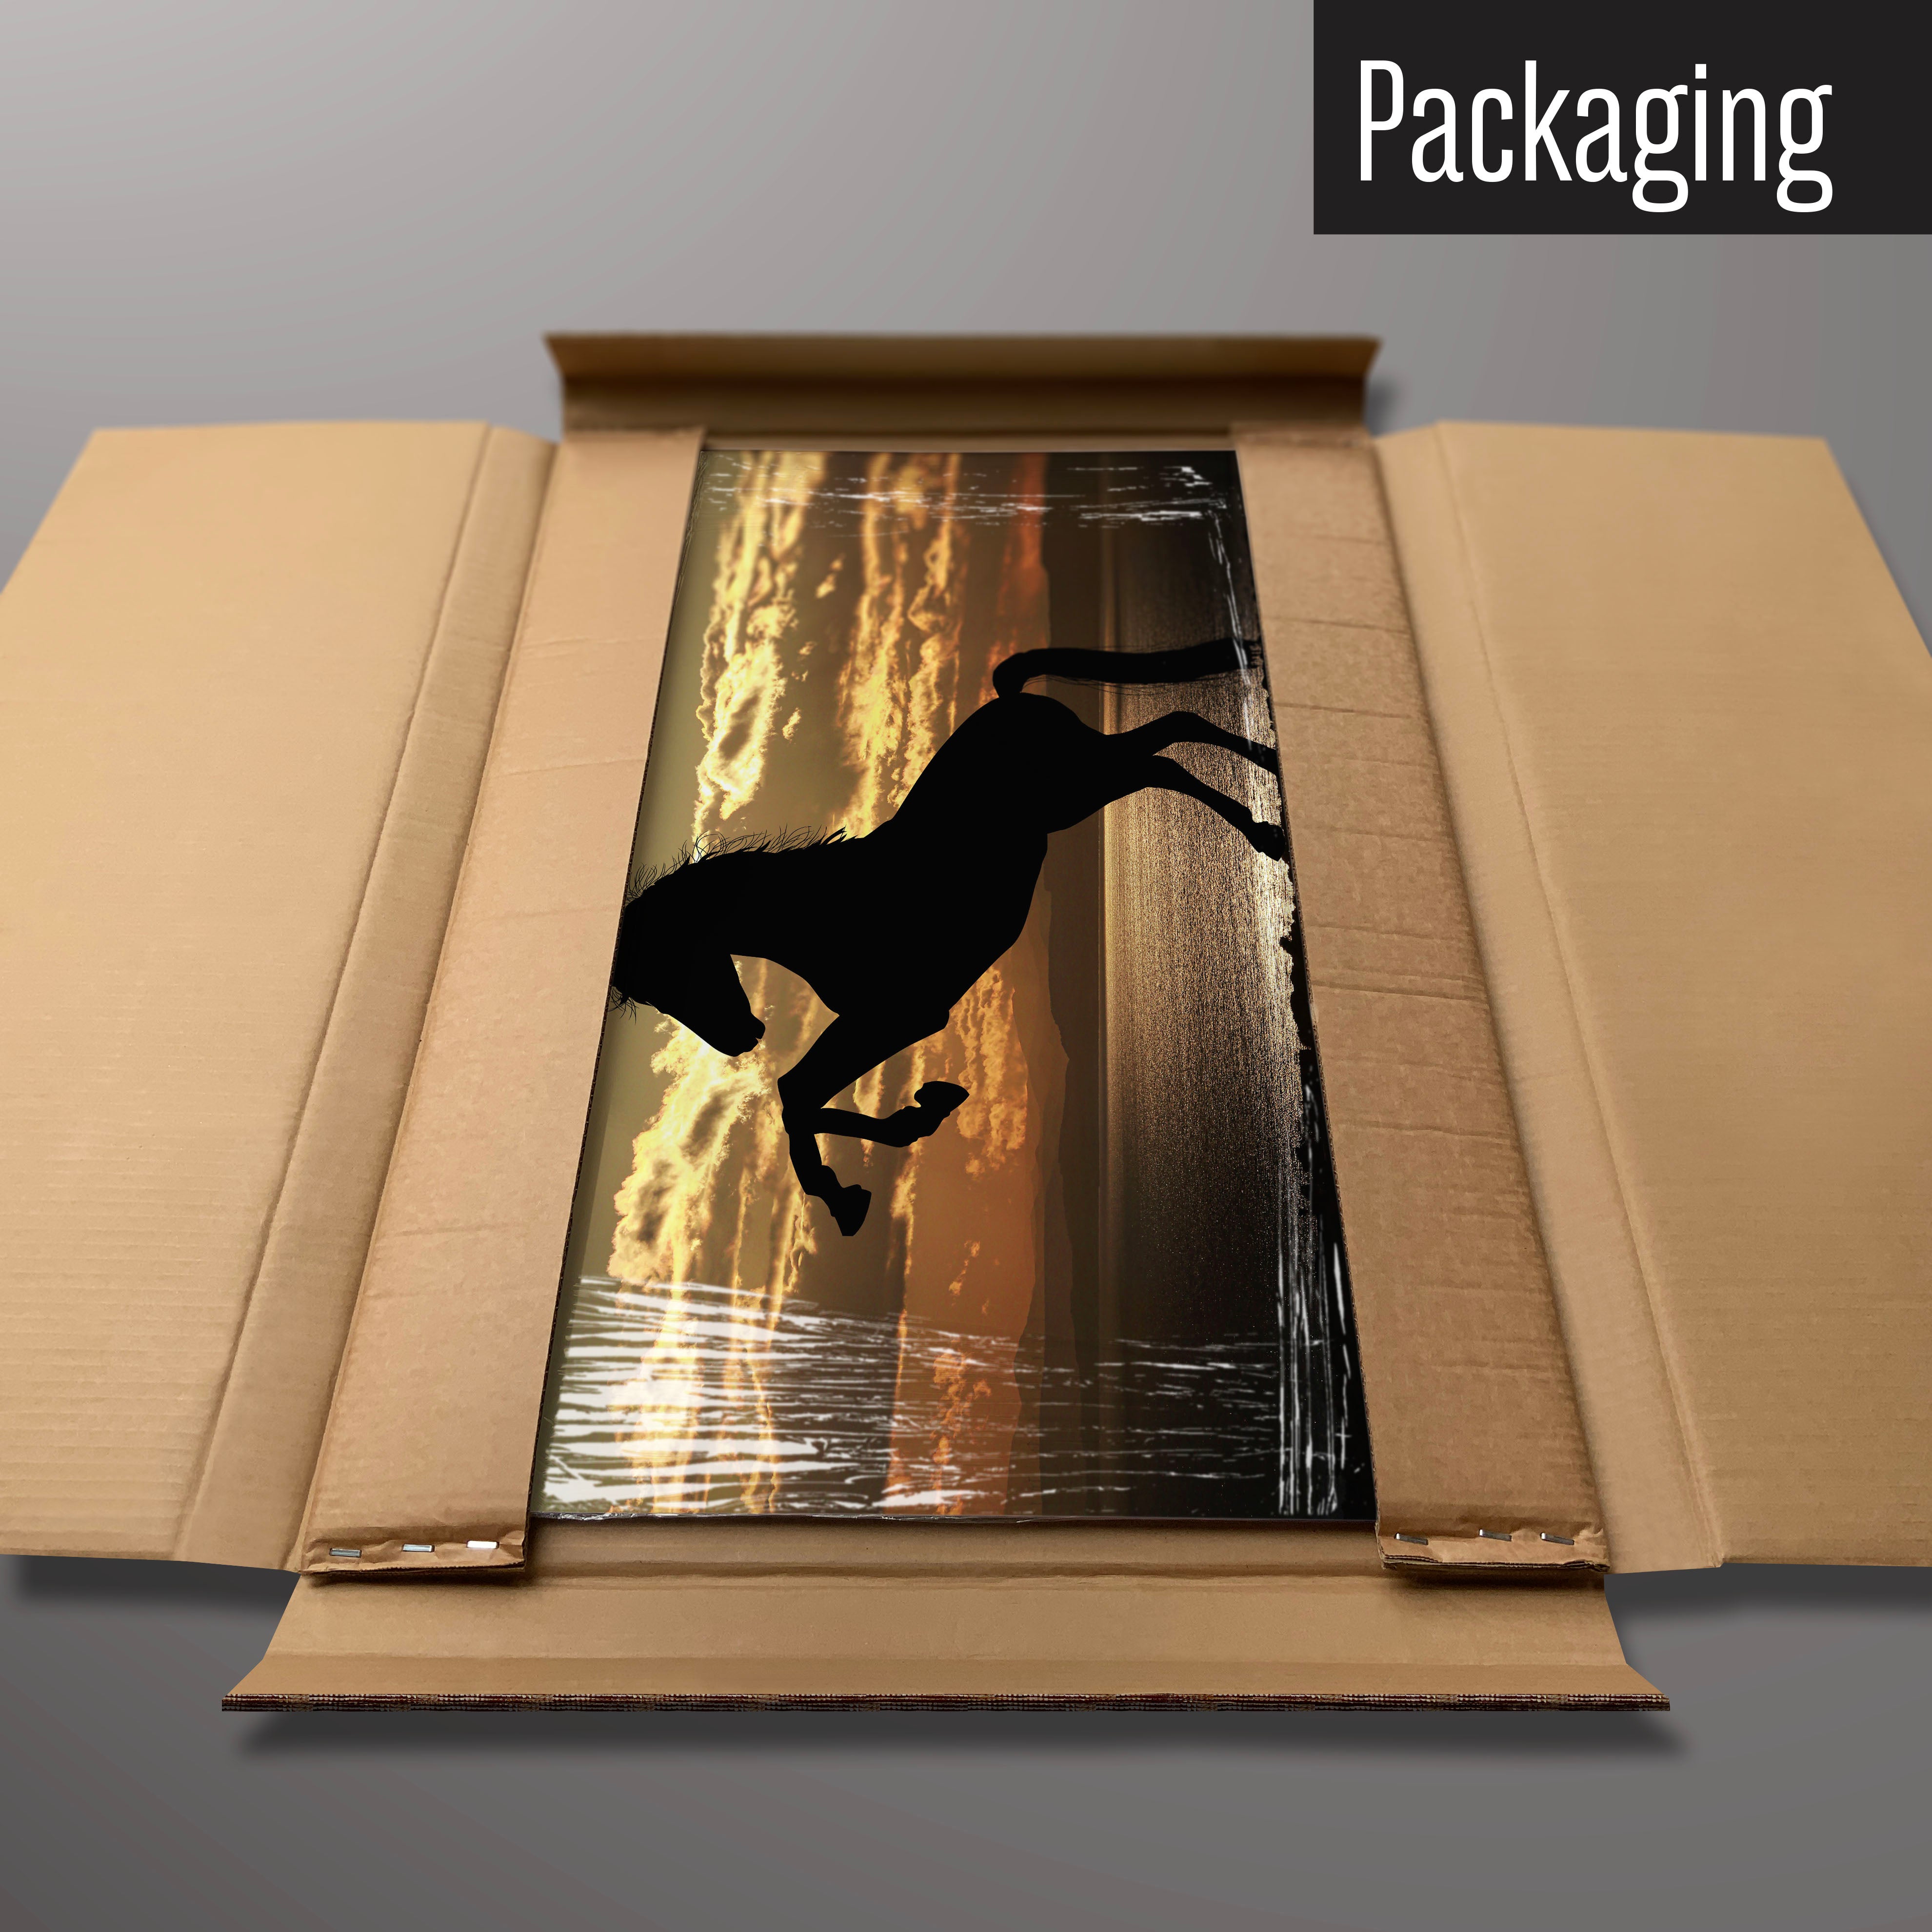 A sunset horse magnetic board in it’s cardboard packaging